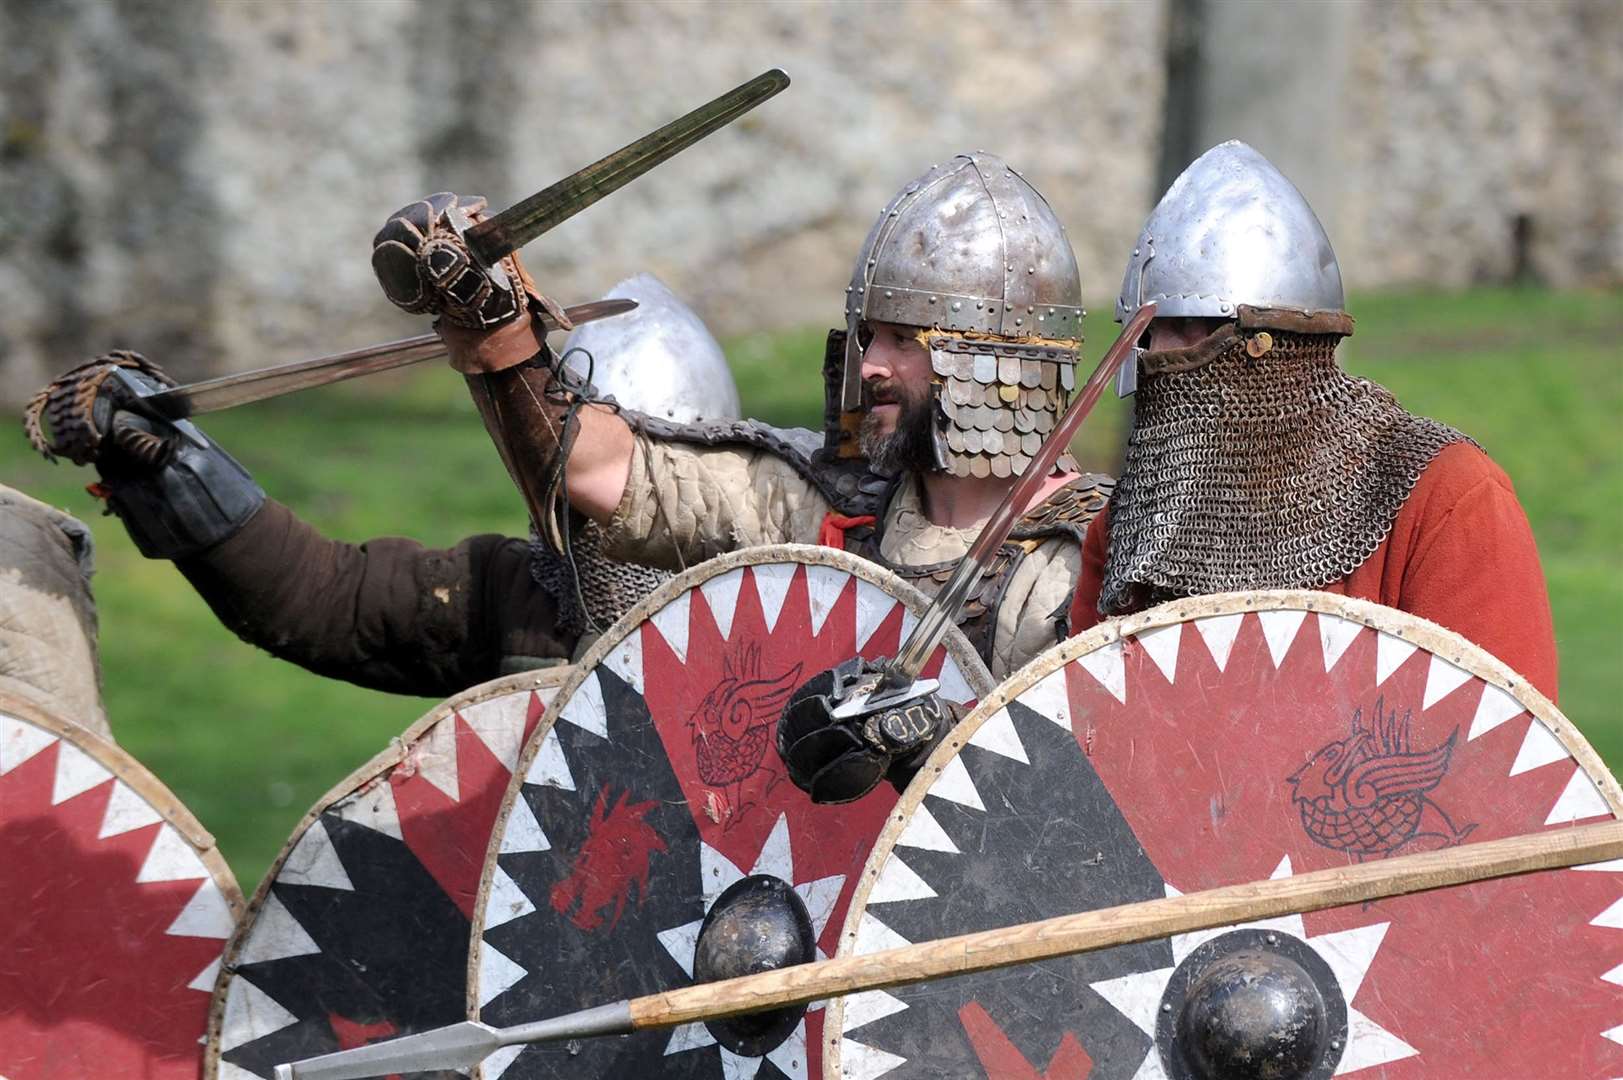 The first so-called Viking raids in England were recorded in the 750s but Danish settlers arrived in Kent some 300 years earlier but settled and became known as Saxons, Angles and Jutes